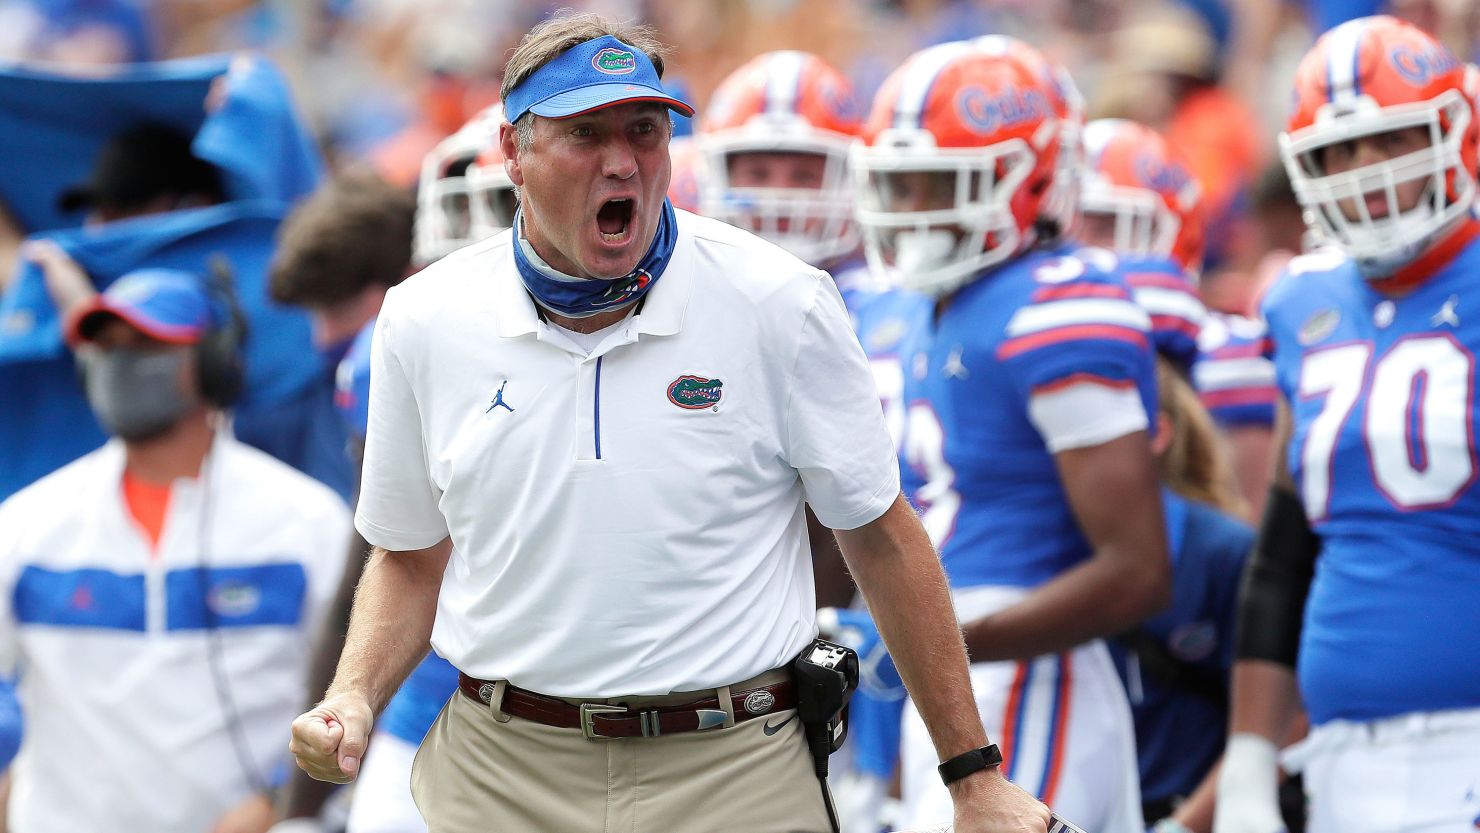 Florida head coach Dan Mullen yells to a referee about a call during an NCAA college football game against South Carolina in Gainesville, Florida, on Saturday, October 3.